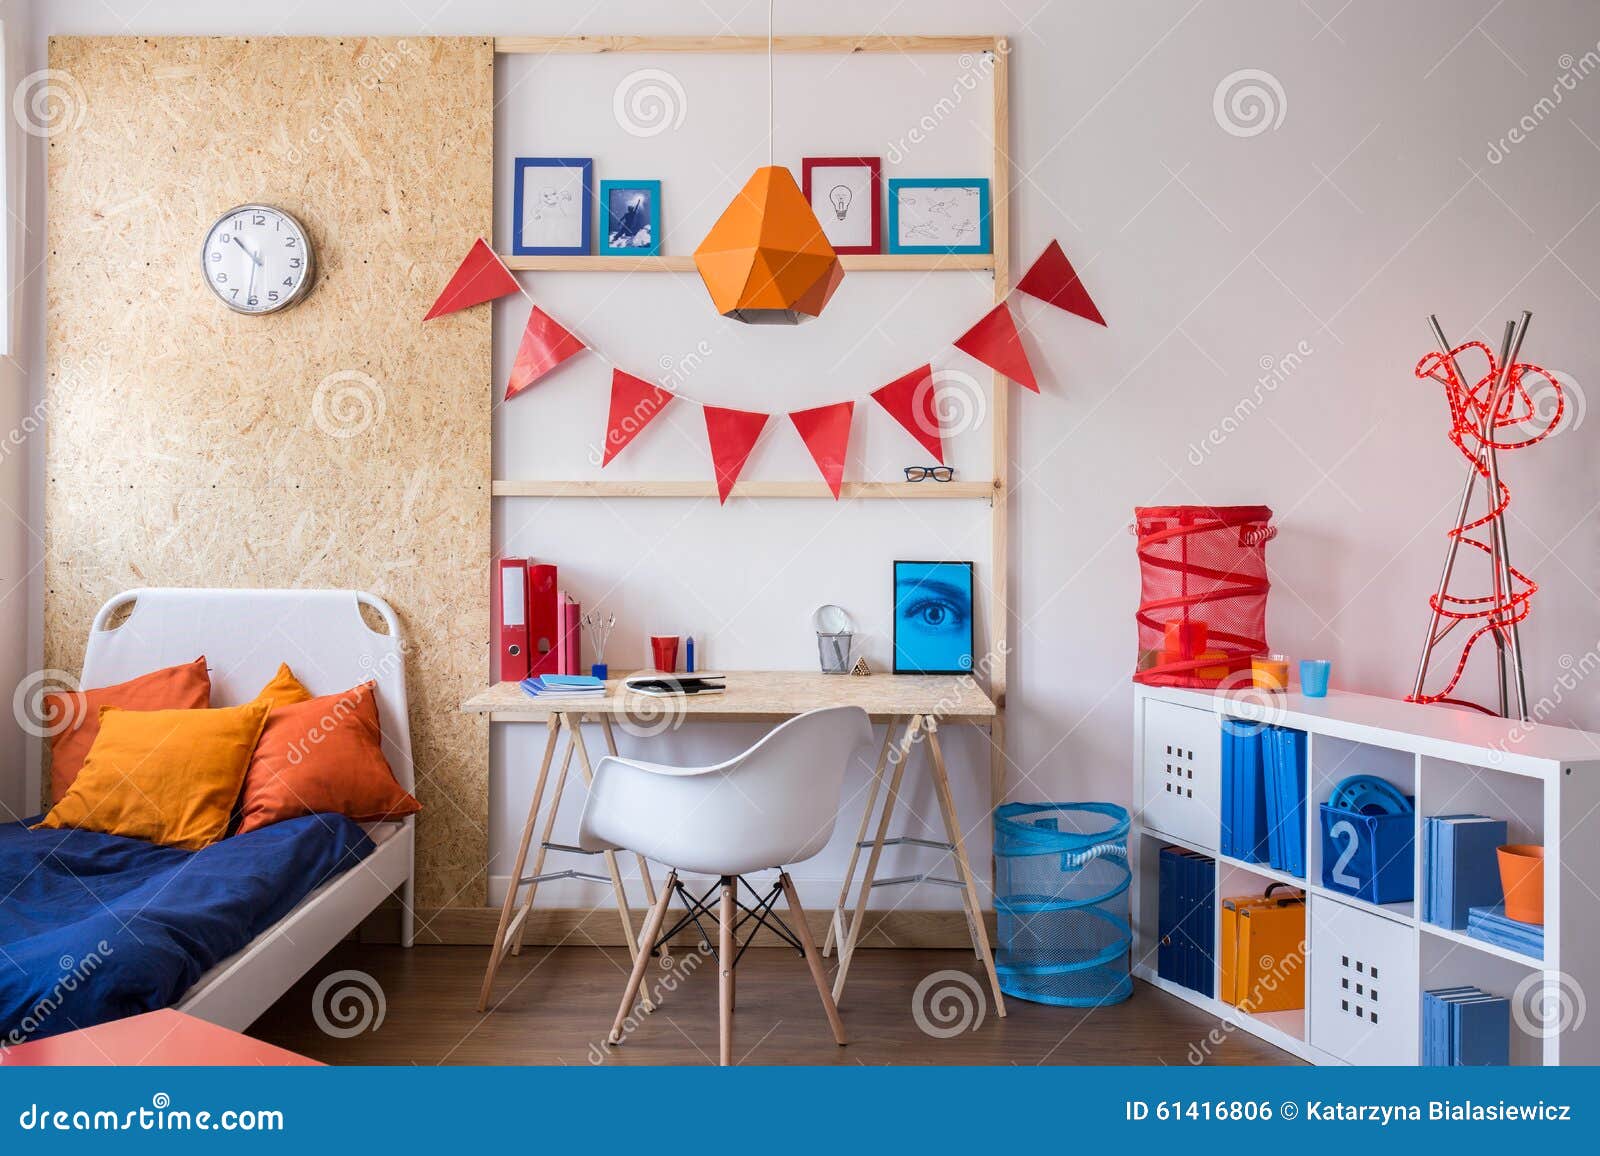 60 758 Room Teenager Photos Free Royalty Free Stock Photos From Dreamstime